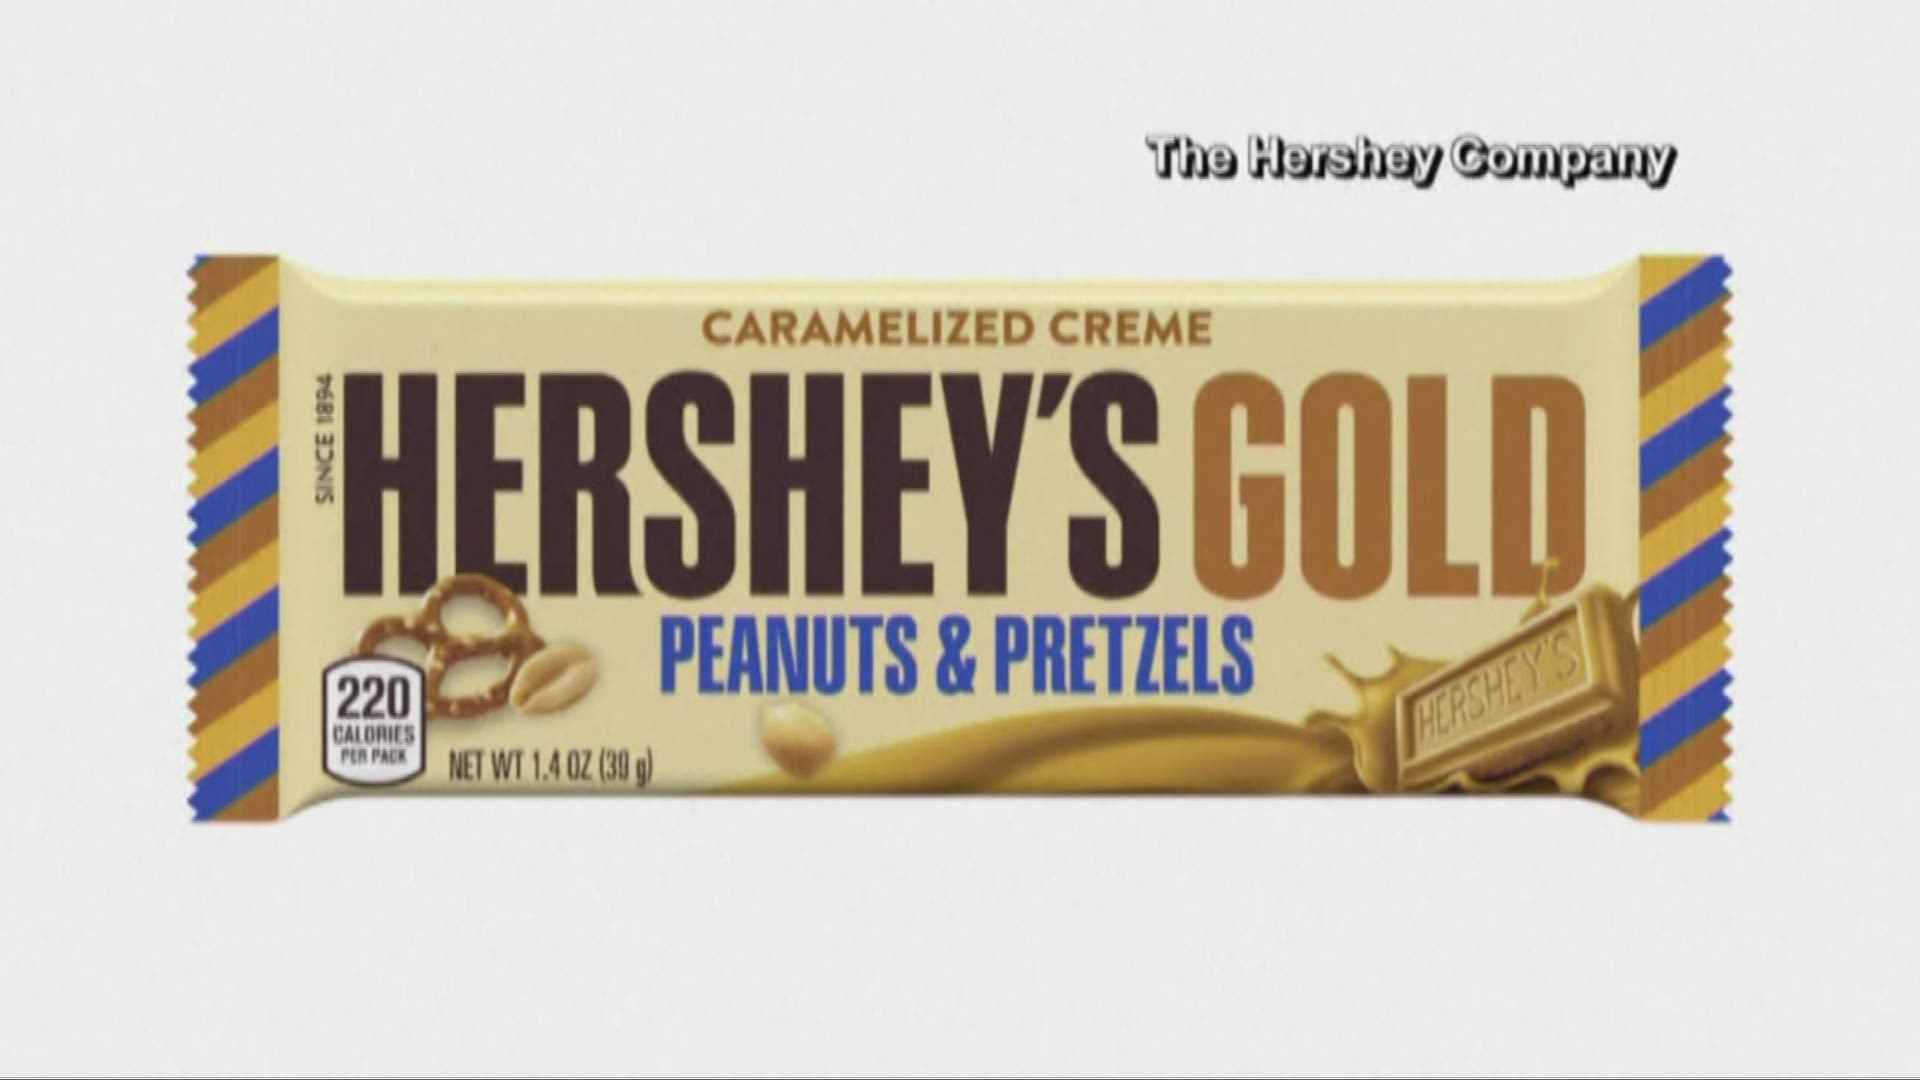 Yum! For the first time since 1995, Hershey's is releasing a new candy bar. The interesting thing? Hershey's Gold doesn't contain any chocolate.